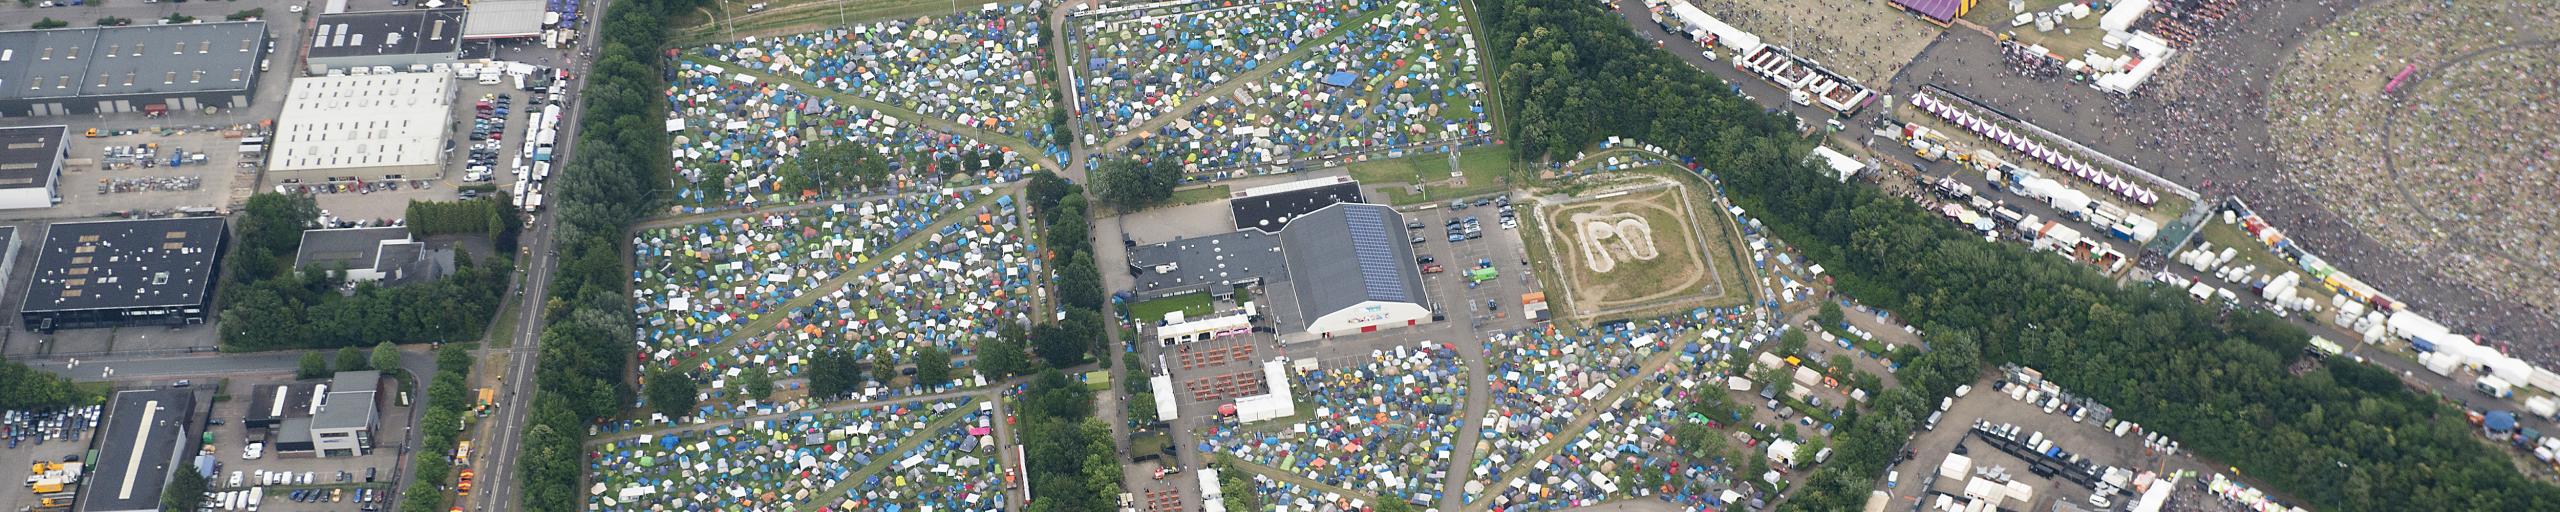 luchtfoto camping